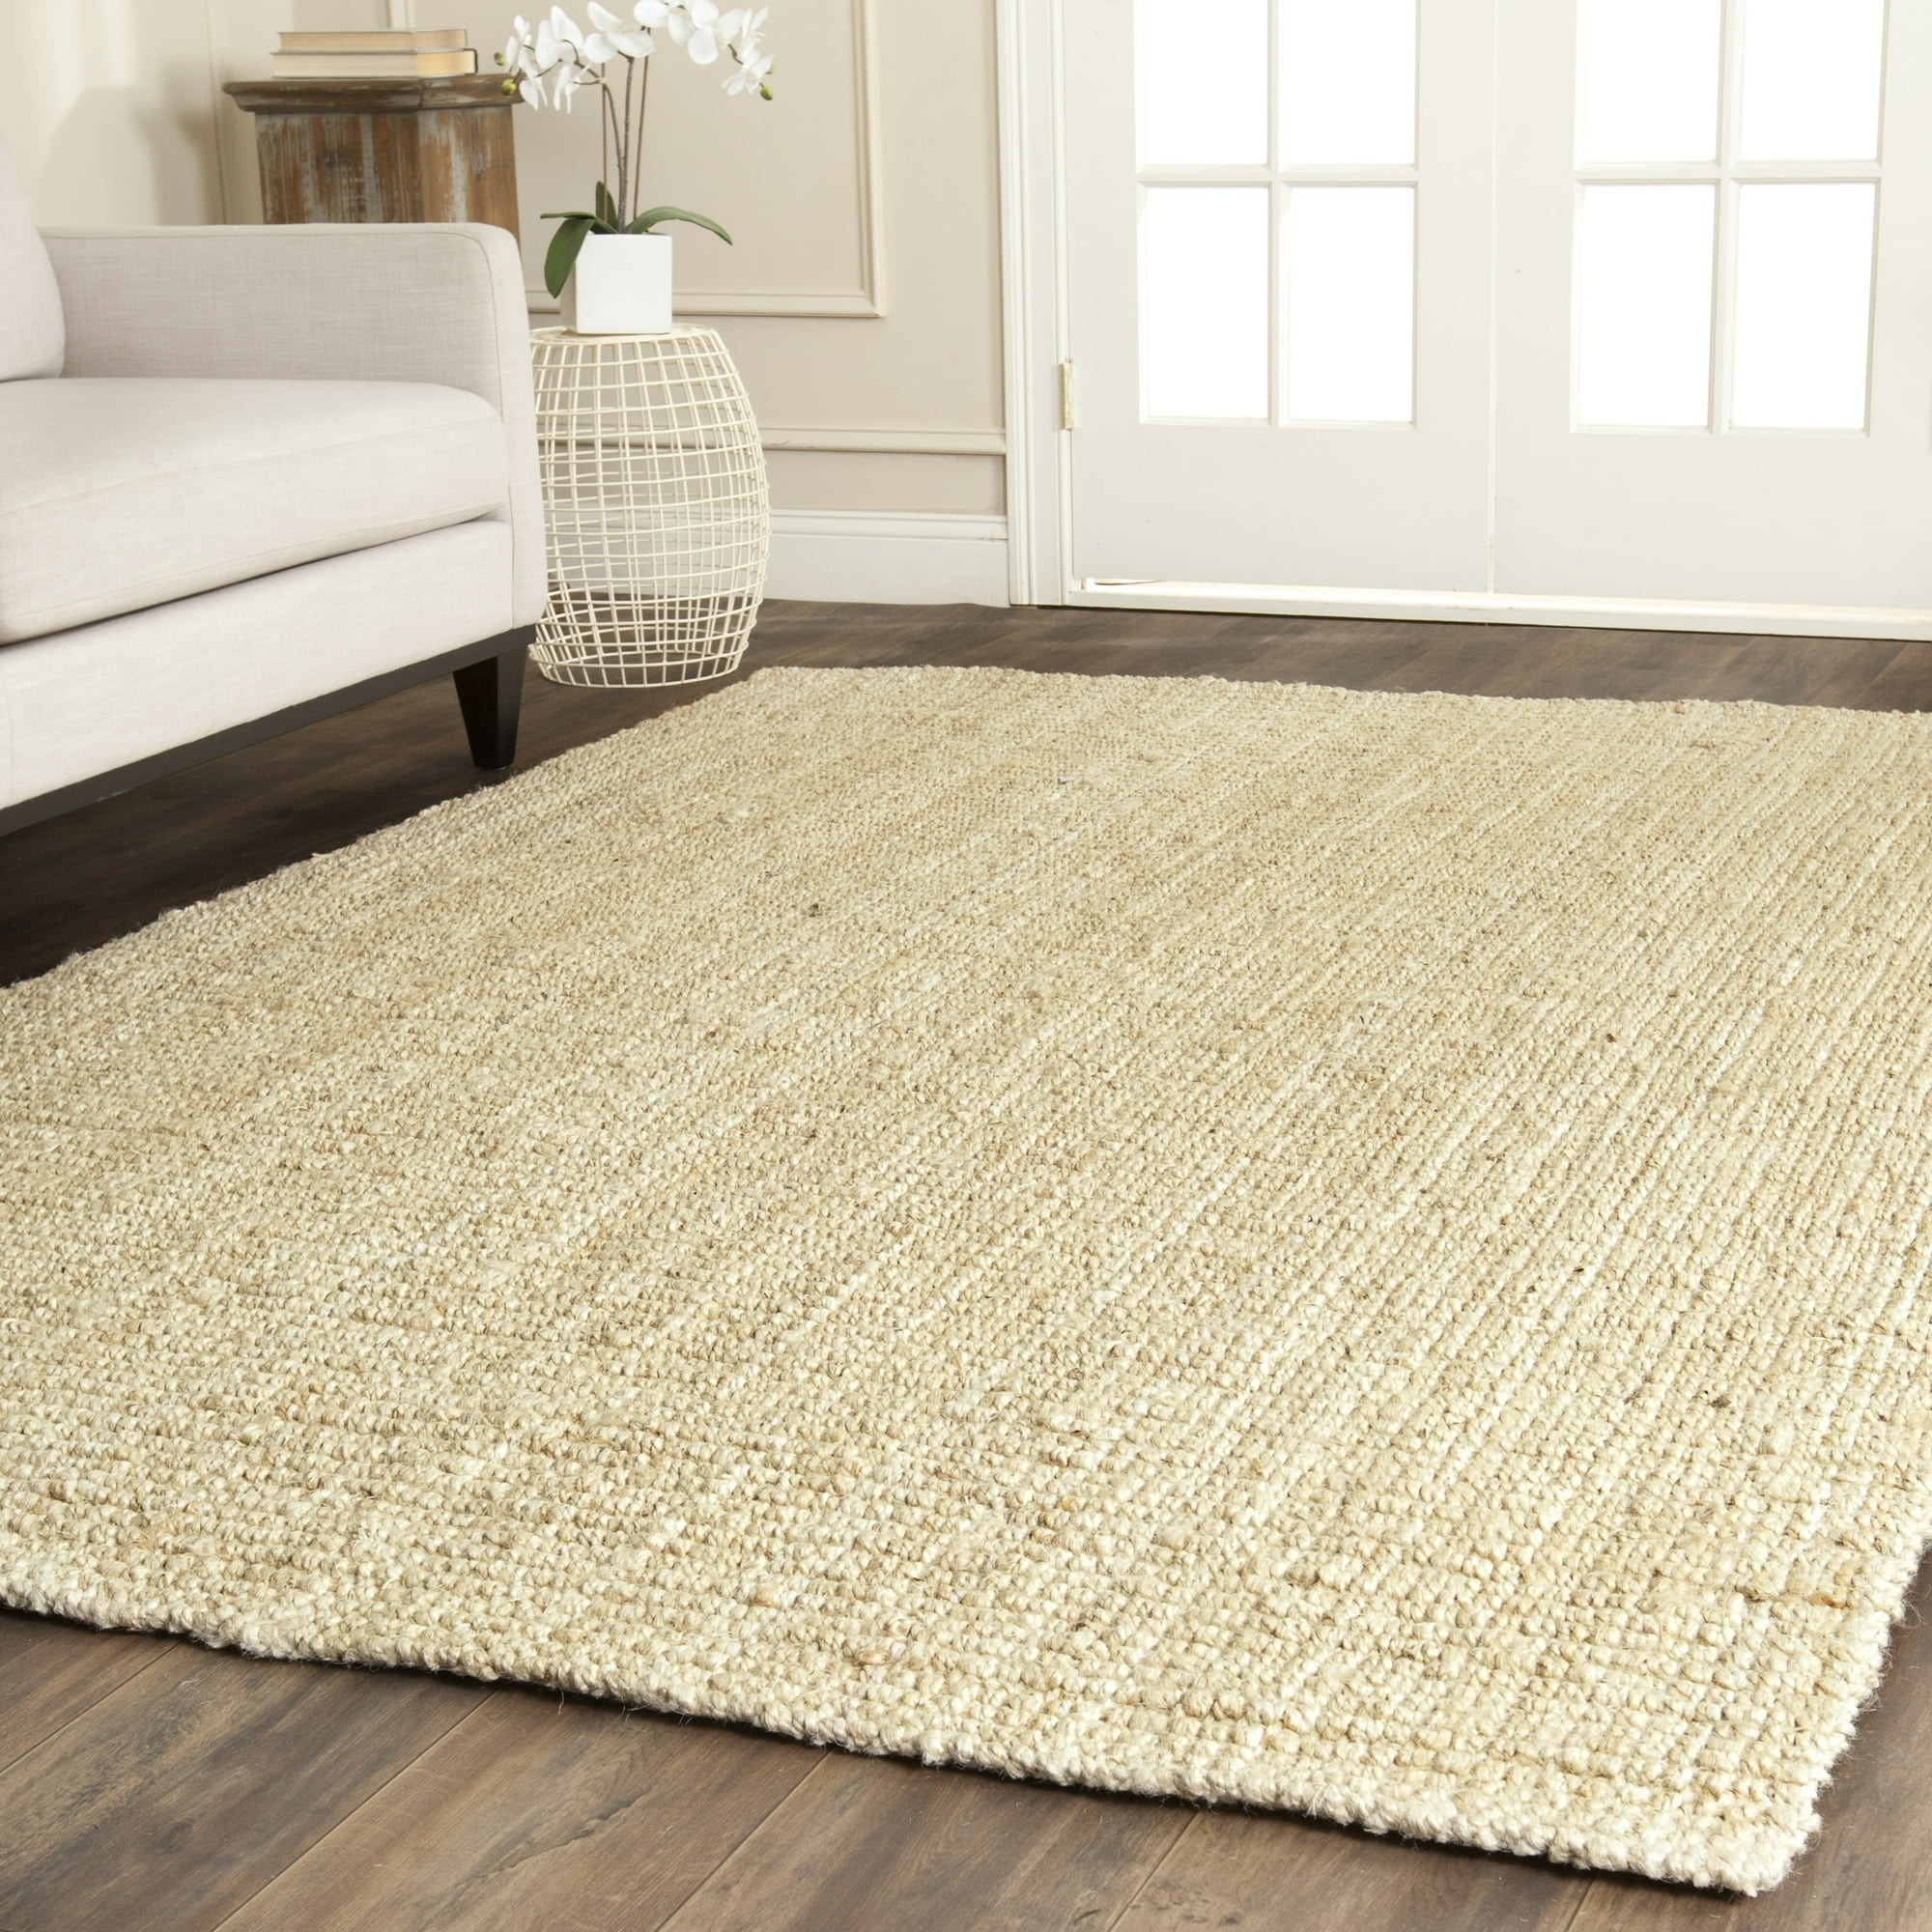 a jute area rug in a living room